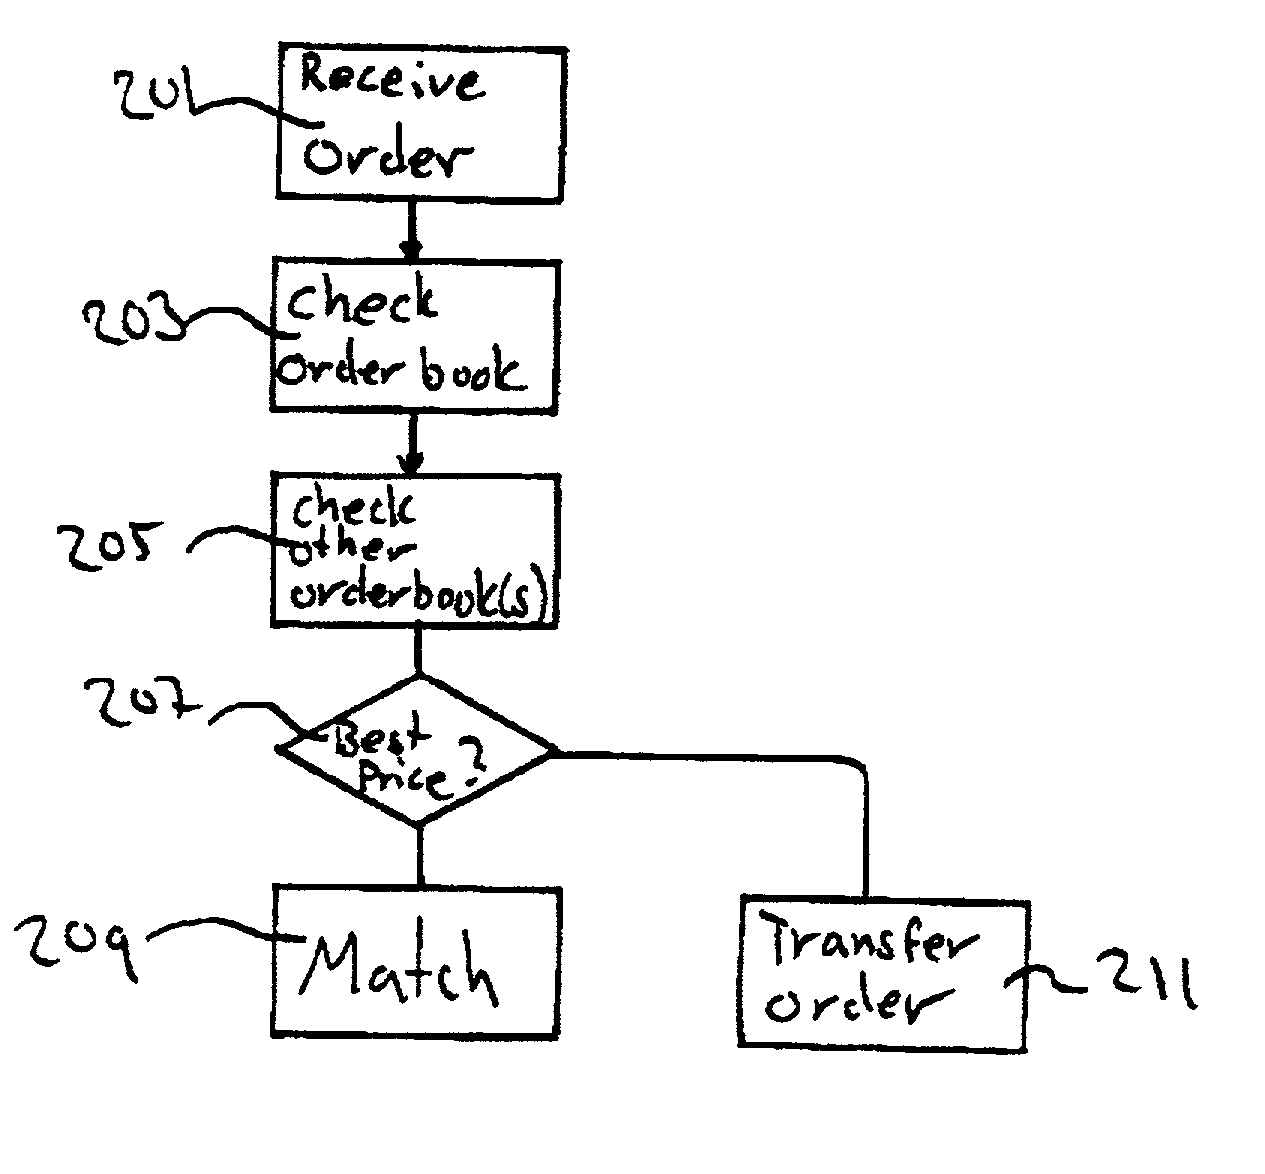 A method and apparatus for setting a price for a security on an automated exchange based on a comparison of prices on other exchanges